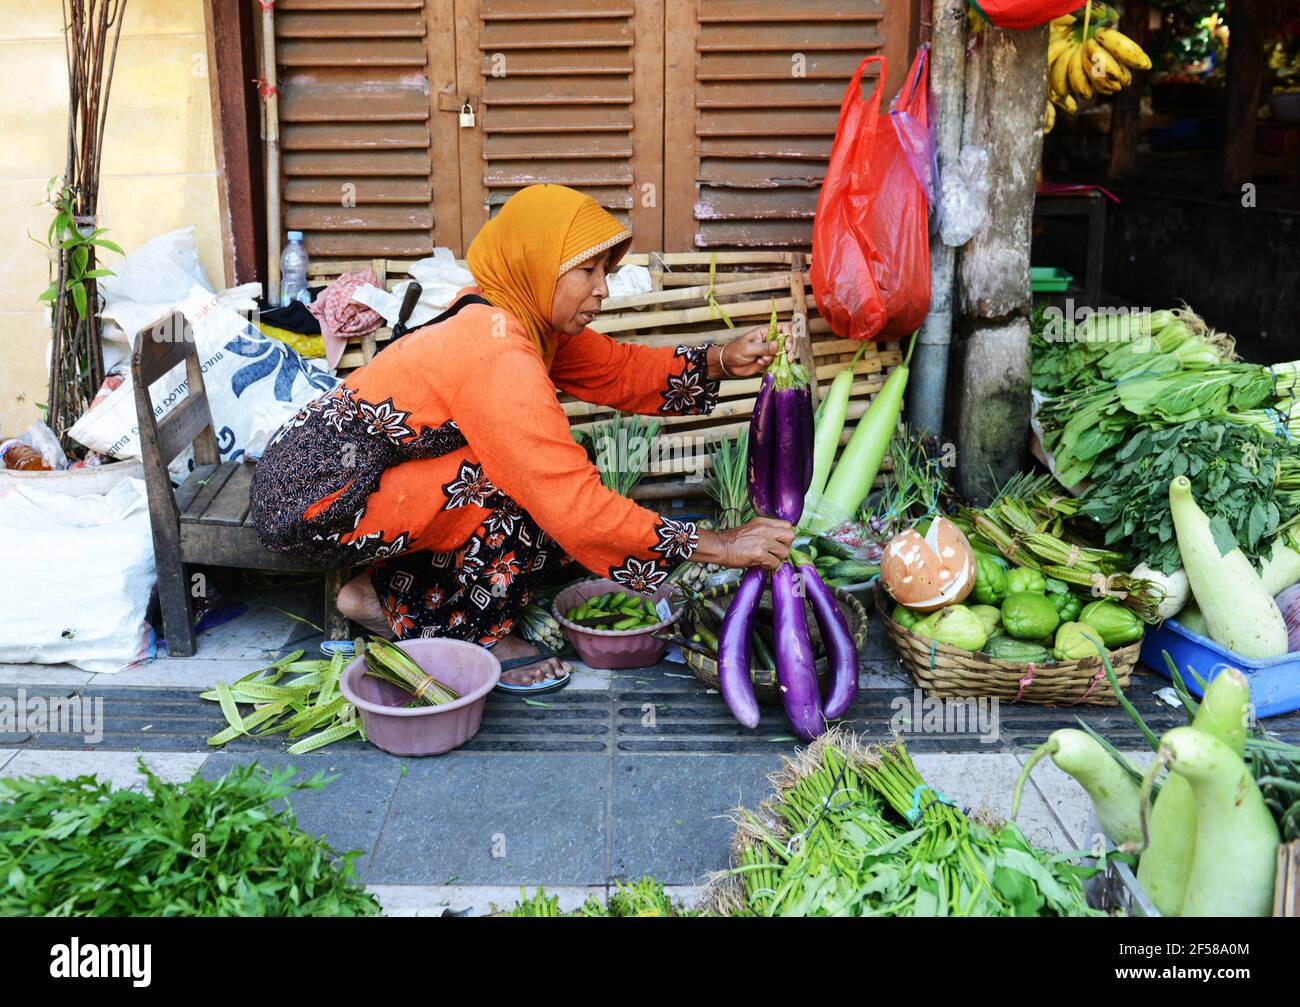 The vibrant and colorful market in Banyuwangi, East Java, Indonesia. Stock Photo